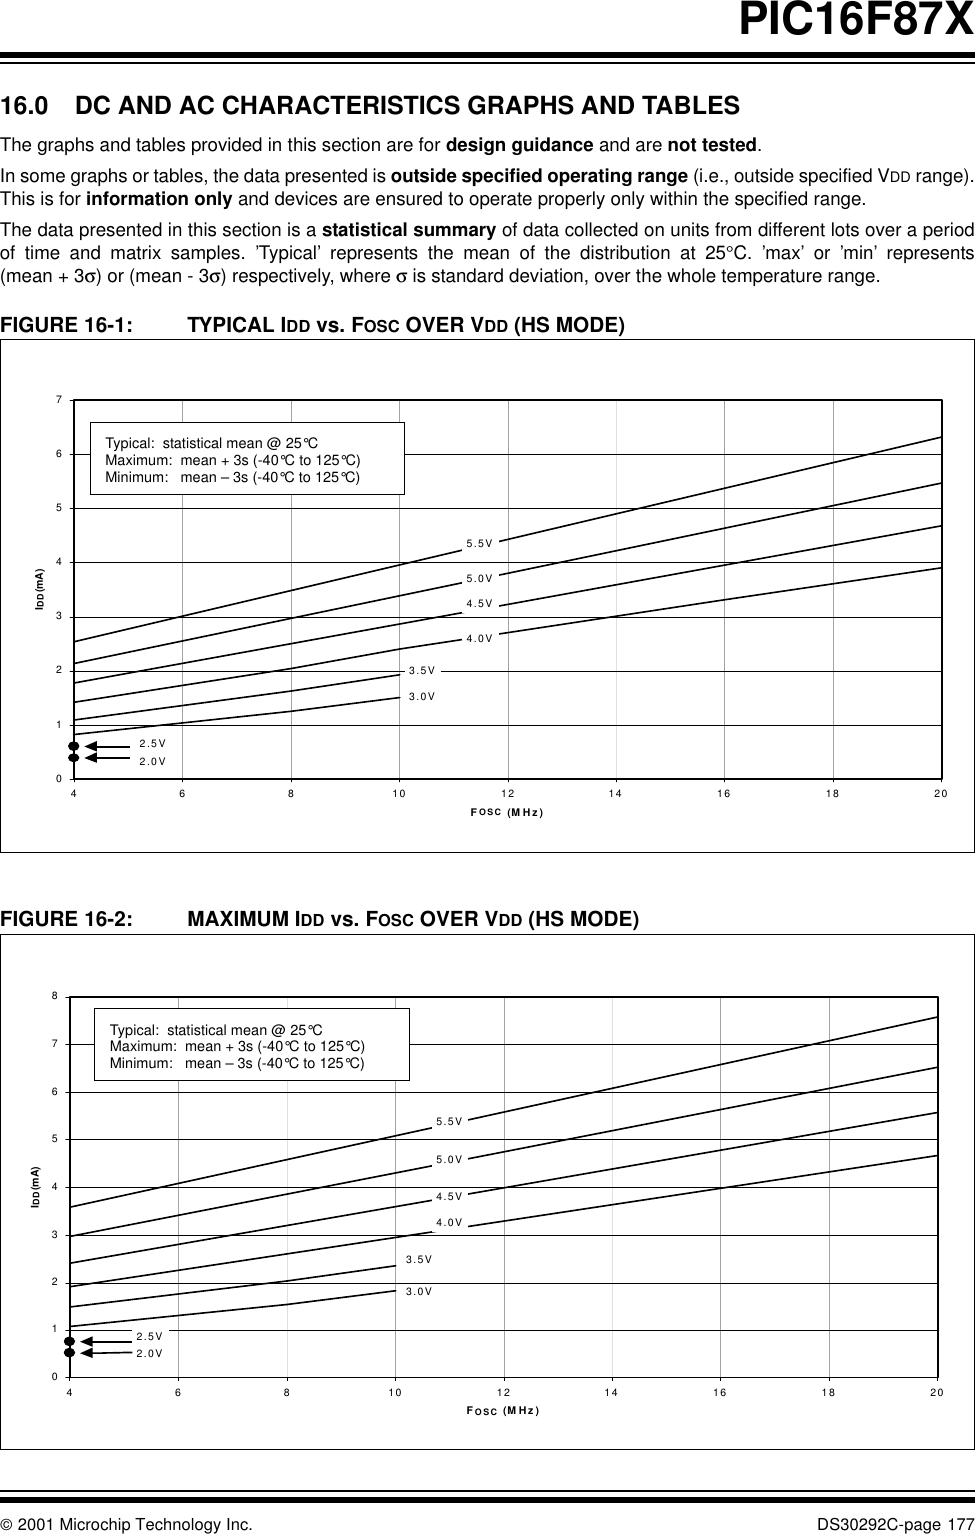  2001 Microchip Technology Inc. DS30292C-page 177PIC16F87X16.0 DC AND AC CHARACTERISTICS GRAPHS AND TABLESThe graphs and tables provided in this section are for design guidance and are not tested. In some graphs or tables, the data presented is outside specified operating range (i.e., outside specified VDD range).This is for information only and devices are ensured to operate properly only within the specified range.The data presented in this section is a statistical summary of data collected on units from different lots over a periodof time and matrix samples. ’Typical’ represents the mean of the distribution at 25°C.  ’max’ or ’min’ represents(mean + 3σ) or (mean - 3σ) respectively, where σ is standard deviation, over the whole temperature range.FIGURE 16-1: TYPICAL IDD vs. FOSC OVER VDD (HS MODE) FIGURE 16-2: MAXIMUM IDD vs. FOSC OVER VDD (HS MODE) 012345674 6 8 101214161820FOSC (M Hz )IDD (mA)2.5V2.0V5.5V5.0V4.5V4.0V3.5V3.0VTypical:  statistical mean @ 25°CMaximum:  mean + 3s (-40°C to 125°C) Minimum:   mean – 3s (-40°C to 125°C)0123456784 6 8 101214161820FOSC (M Hz)IDD (mA)5.5V5.0V4.5V4.0V3.5V3.0V2.5V2.0VTypical:  statistical mean @ 25°CMaximum:  mean + 3s (-40°C to 125°C) Minimum:   mean – 3s (-40°C to 125°C)